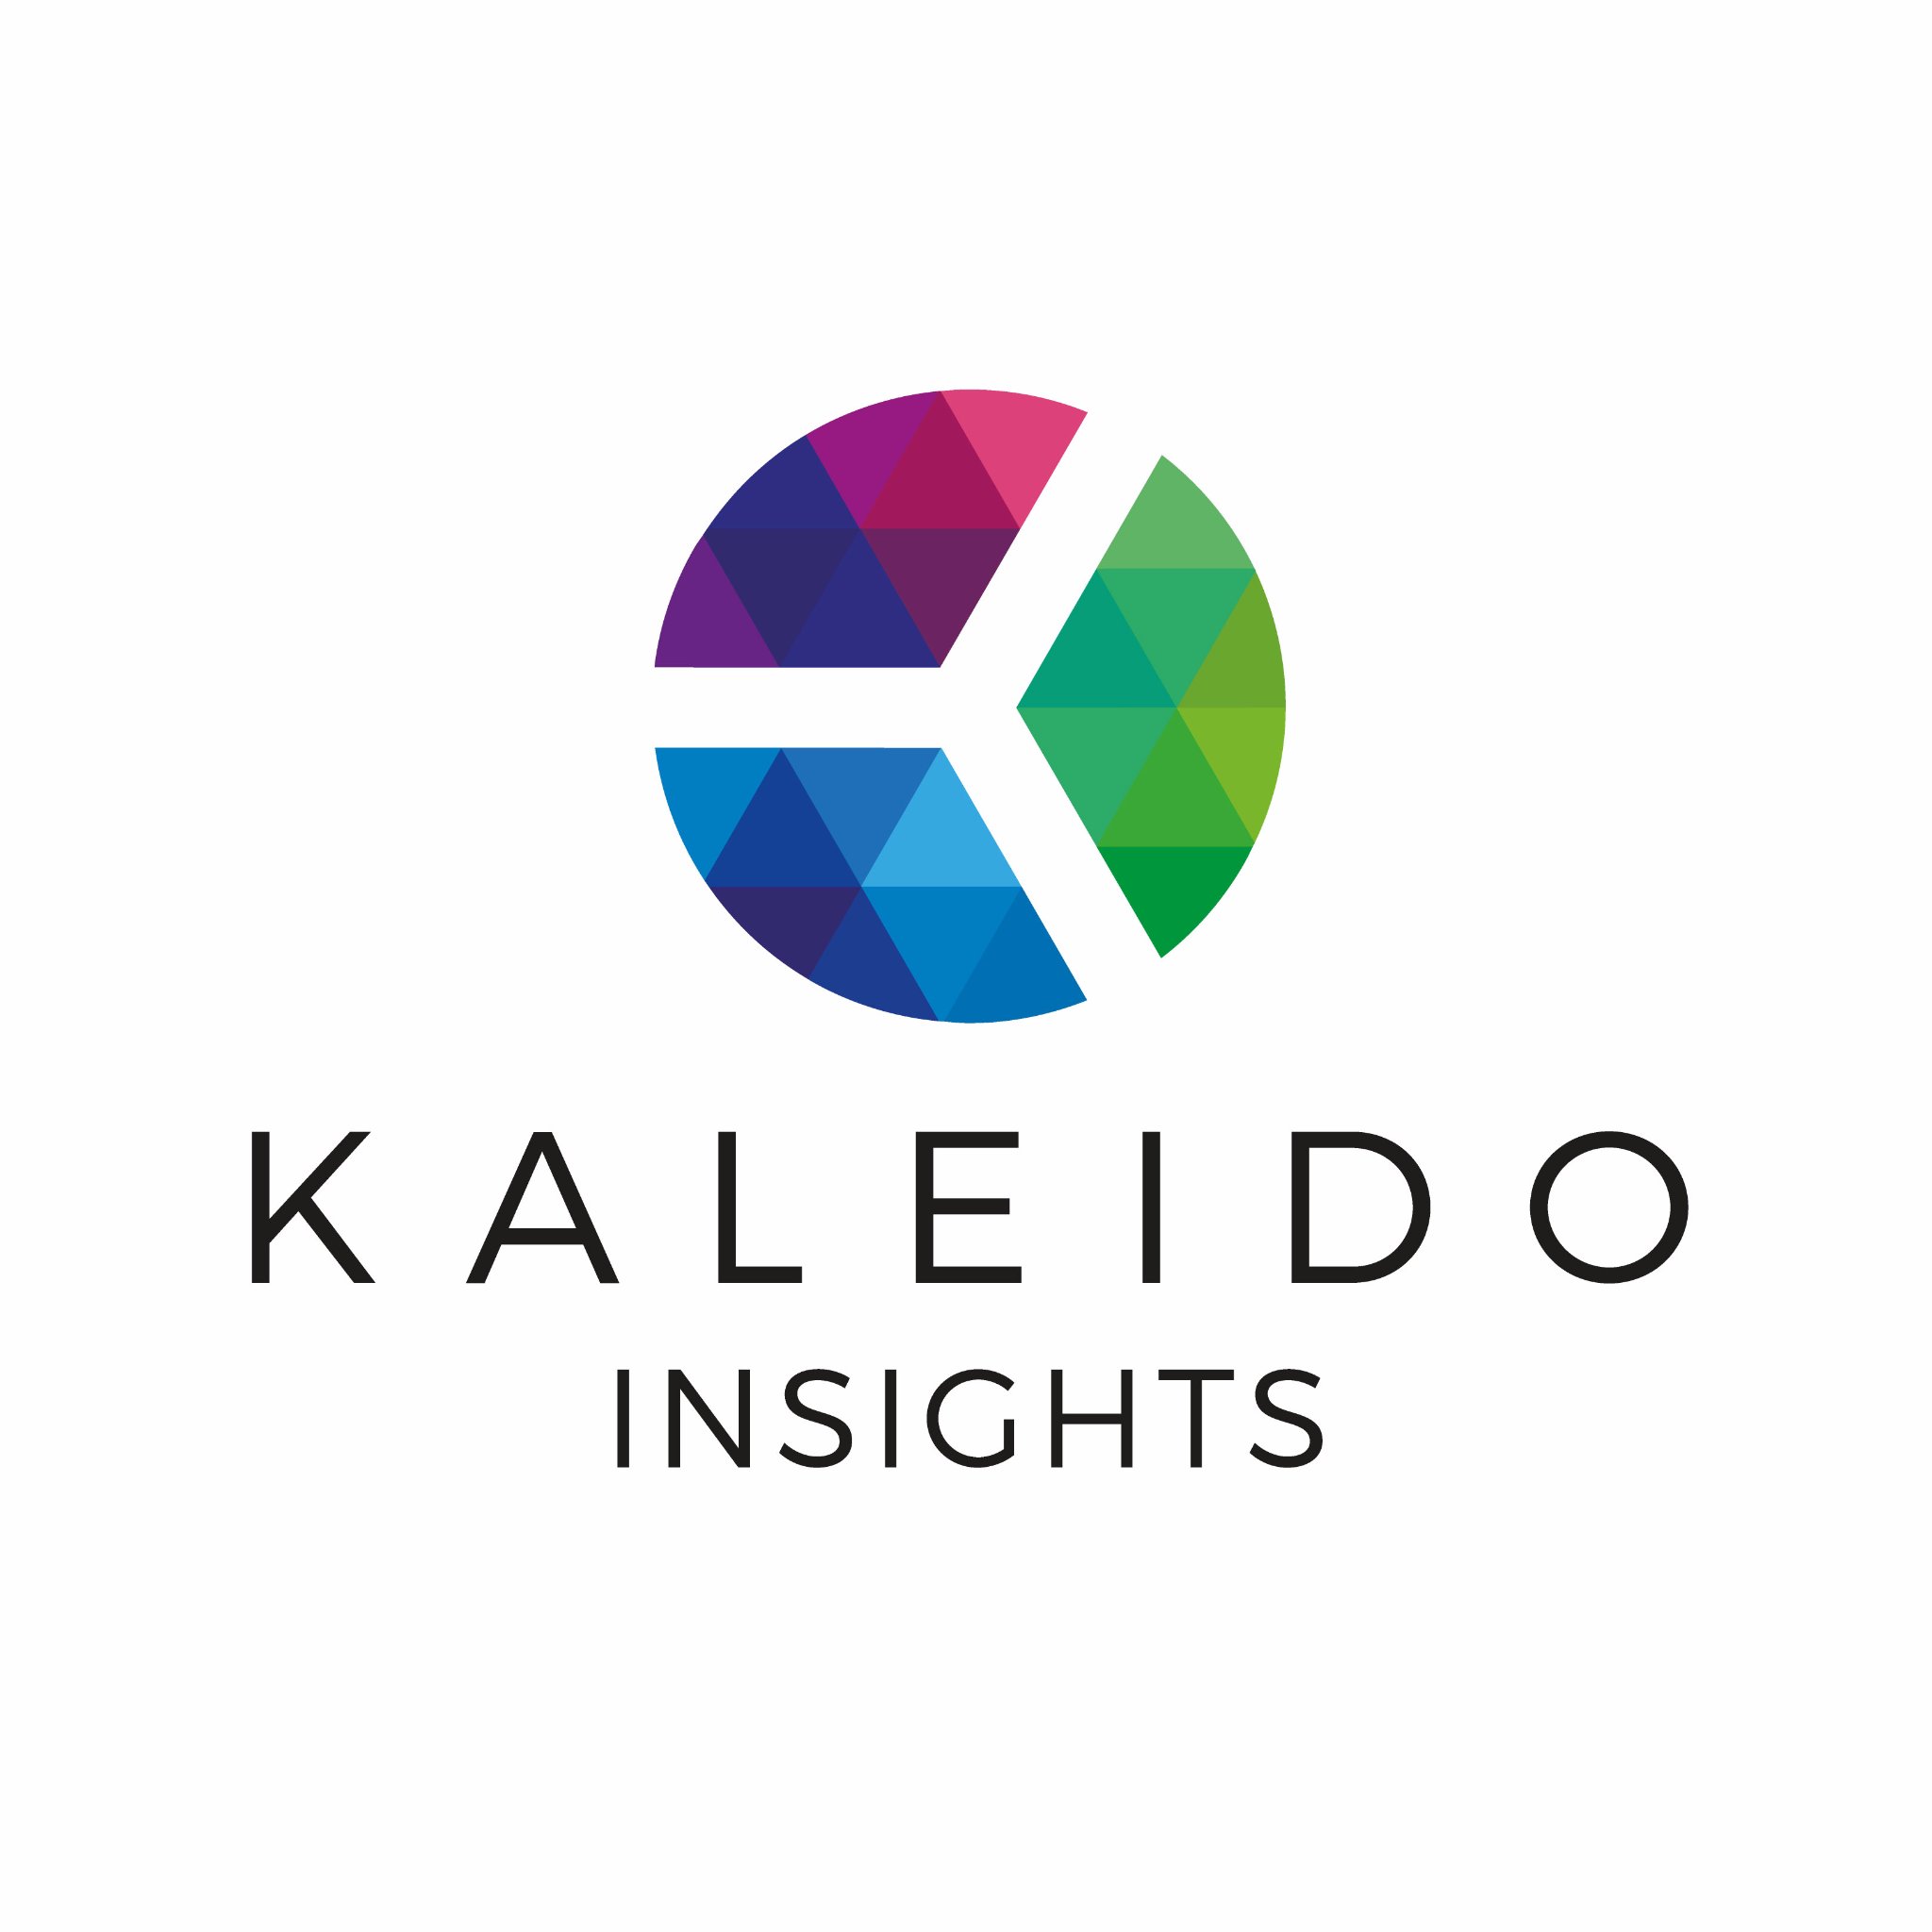 Kaleido Insights was a research firm analyzing how new technologies impact humans, organizations & ecosystems. This account is no longer active or monitored.